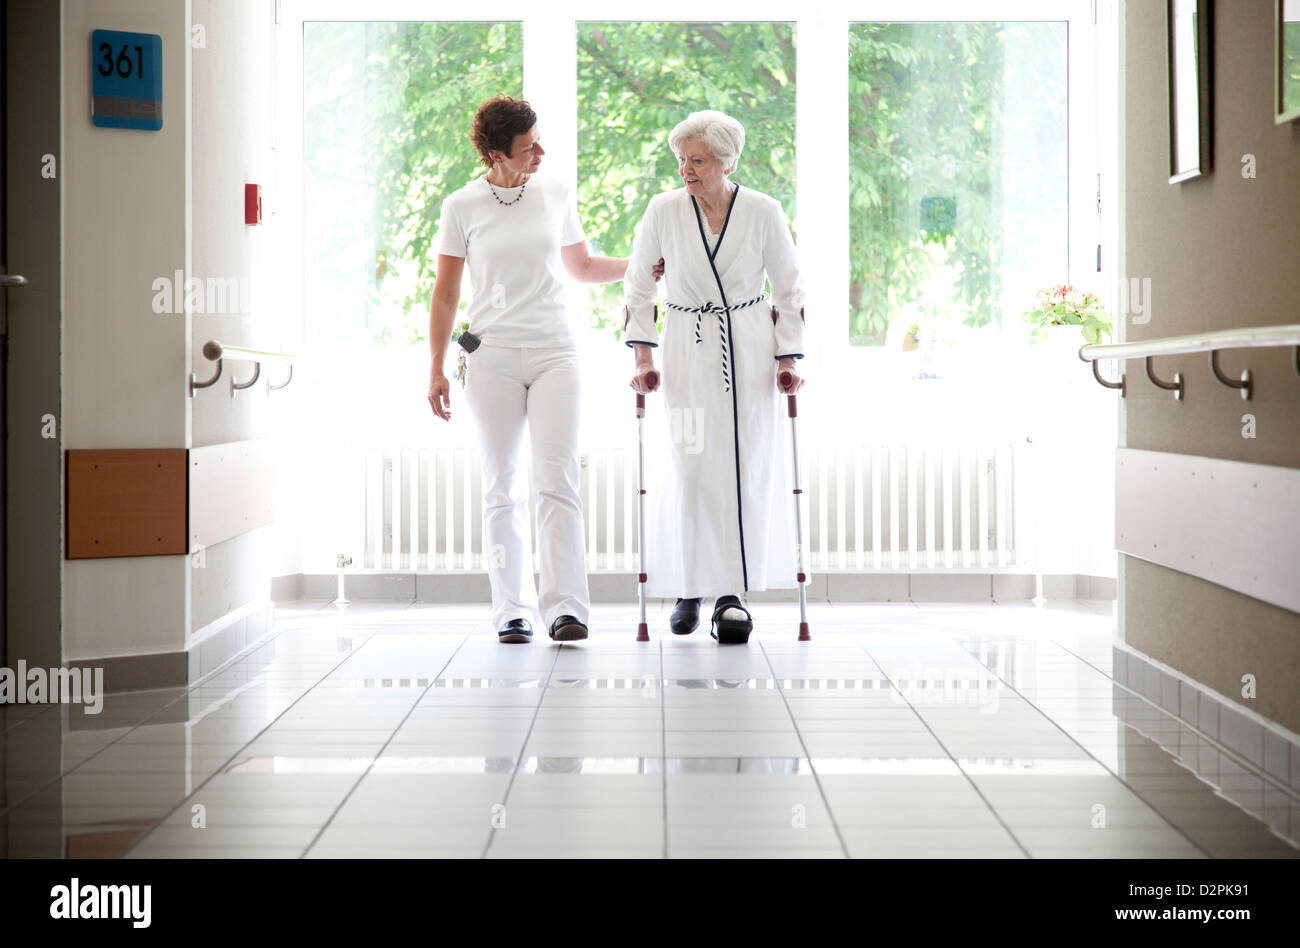 Essen, Germany, physiotherapy in hospital Stock Photo